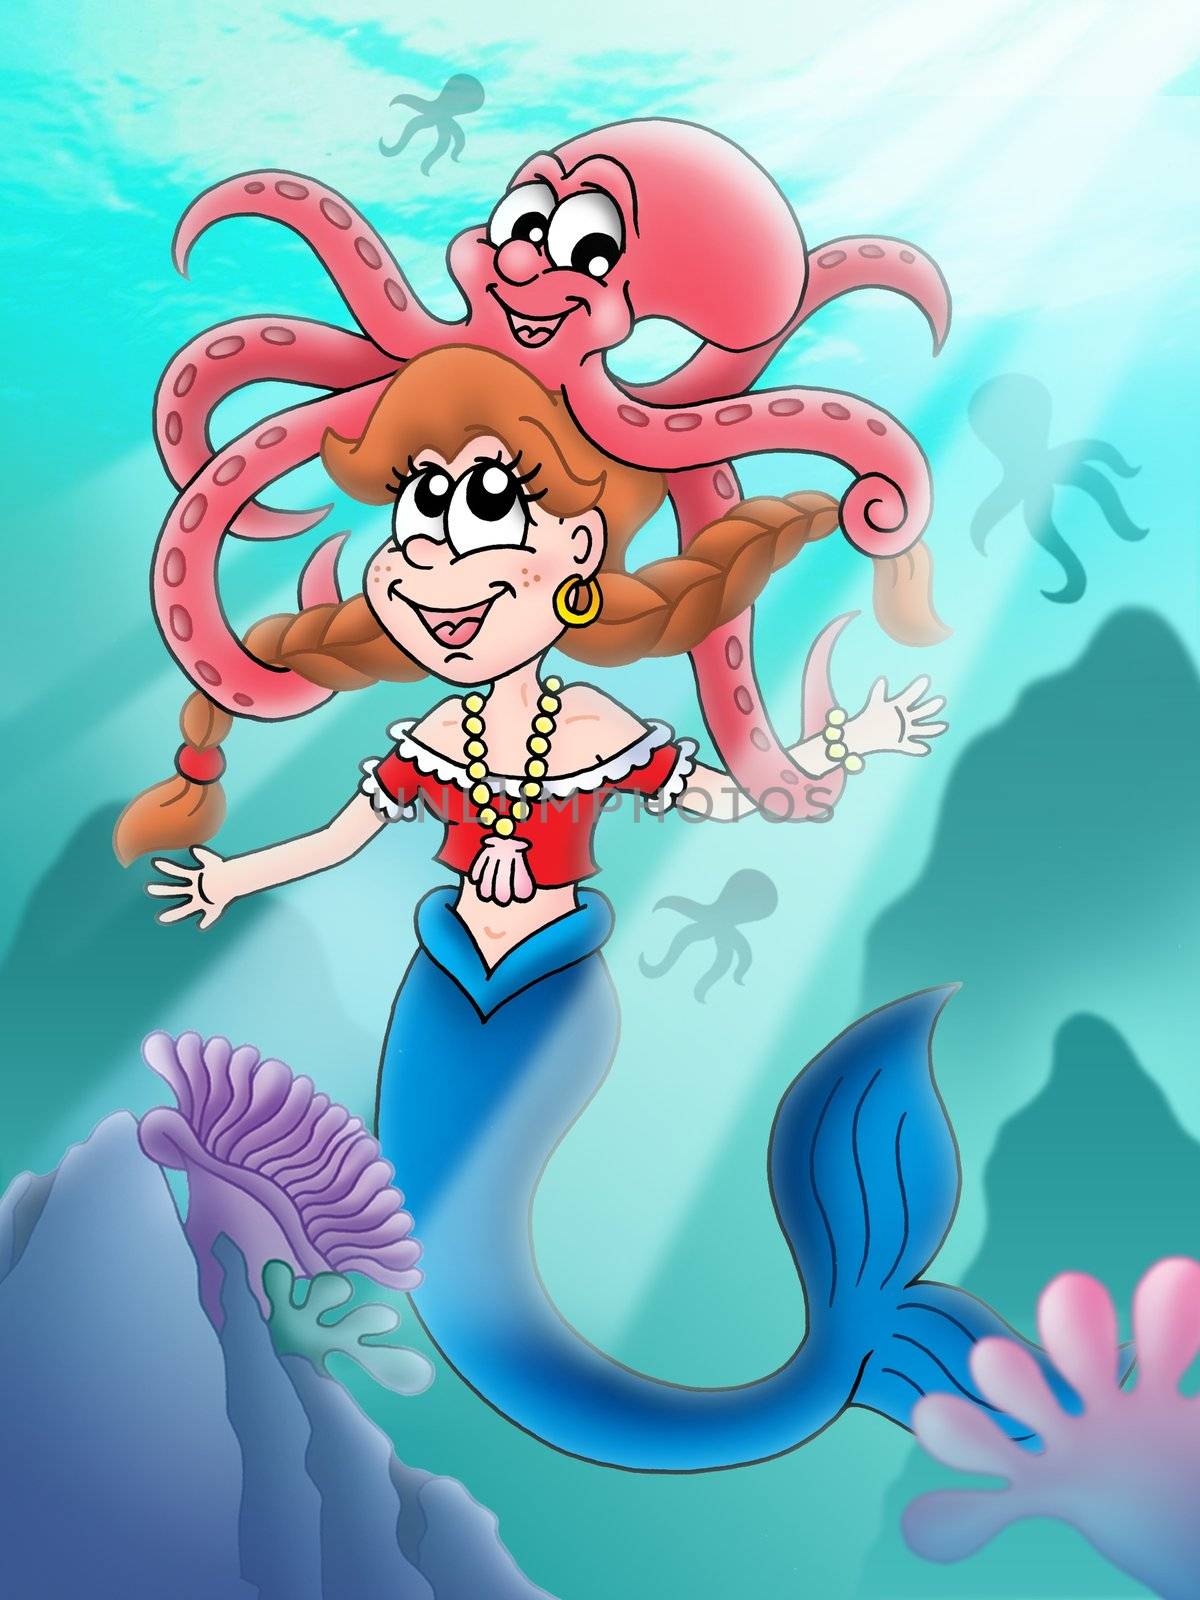 Cute mermaid with octopus - color illustration.